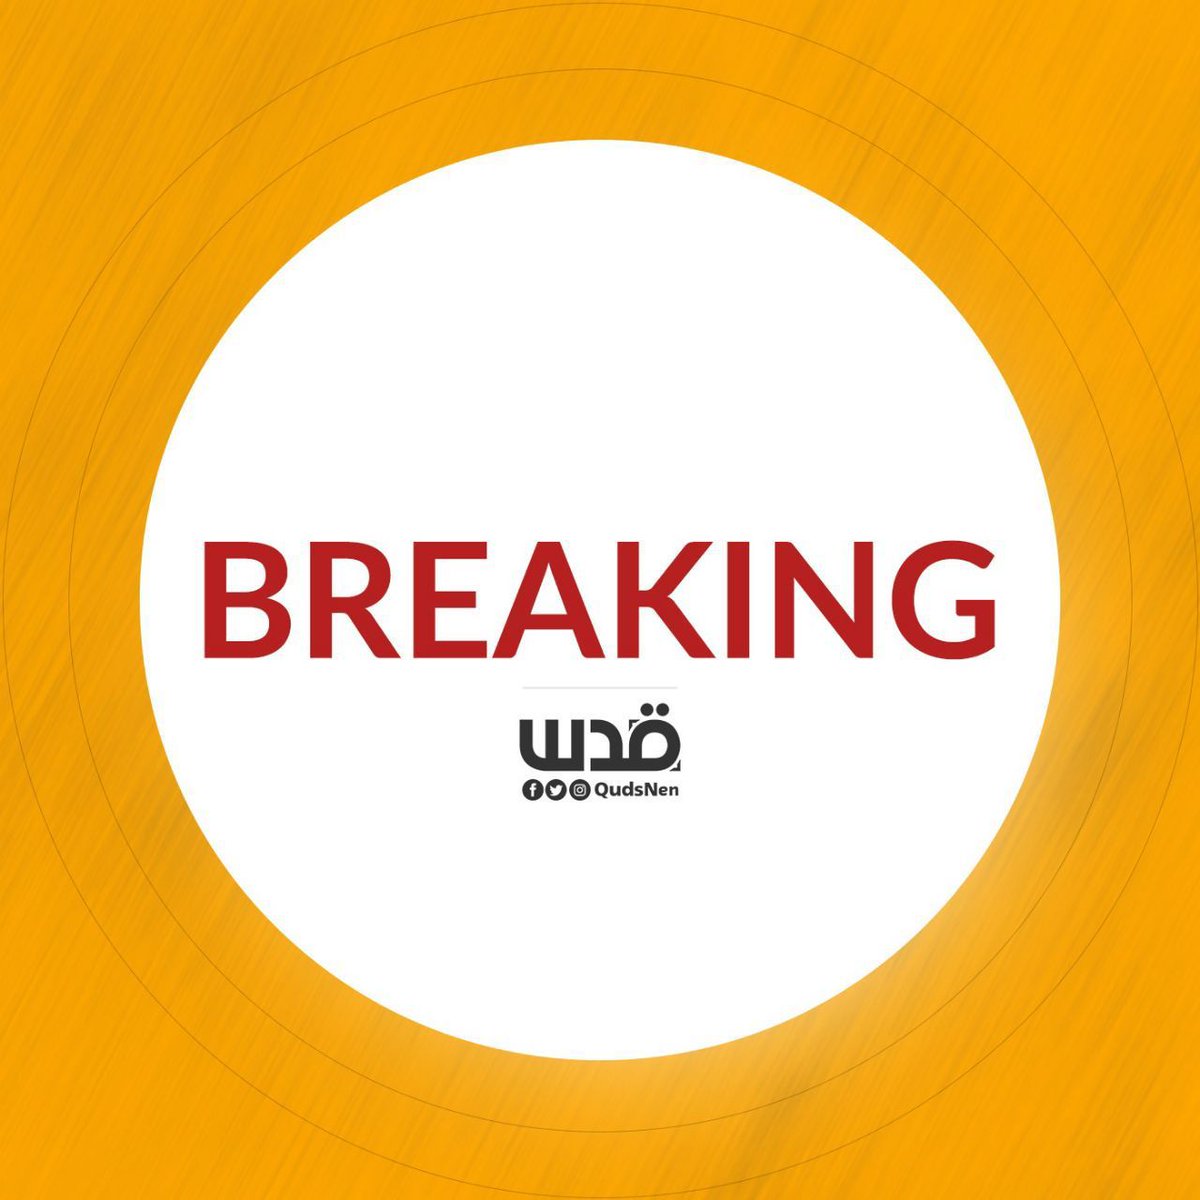 BREAKING| The Civil Defence says its teams in Khan Younis today retrieved 50 dead bodies from various groups and ages. They were collected by the Israeli occupation forces and buried in mass graves inside Nasser Hospital. 'Our teams continue their search and retrieval